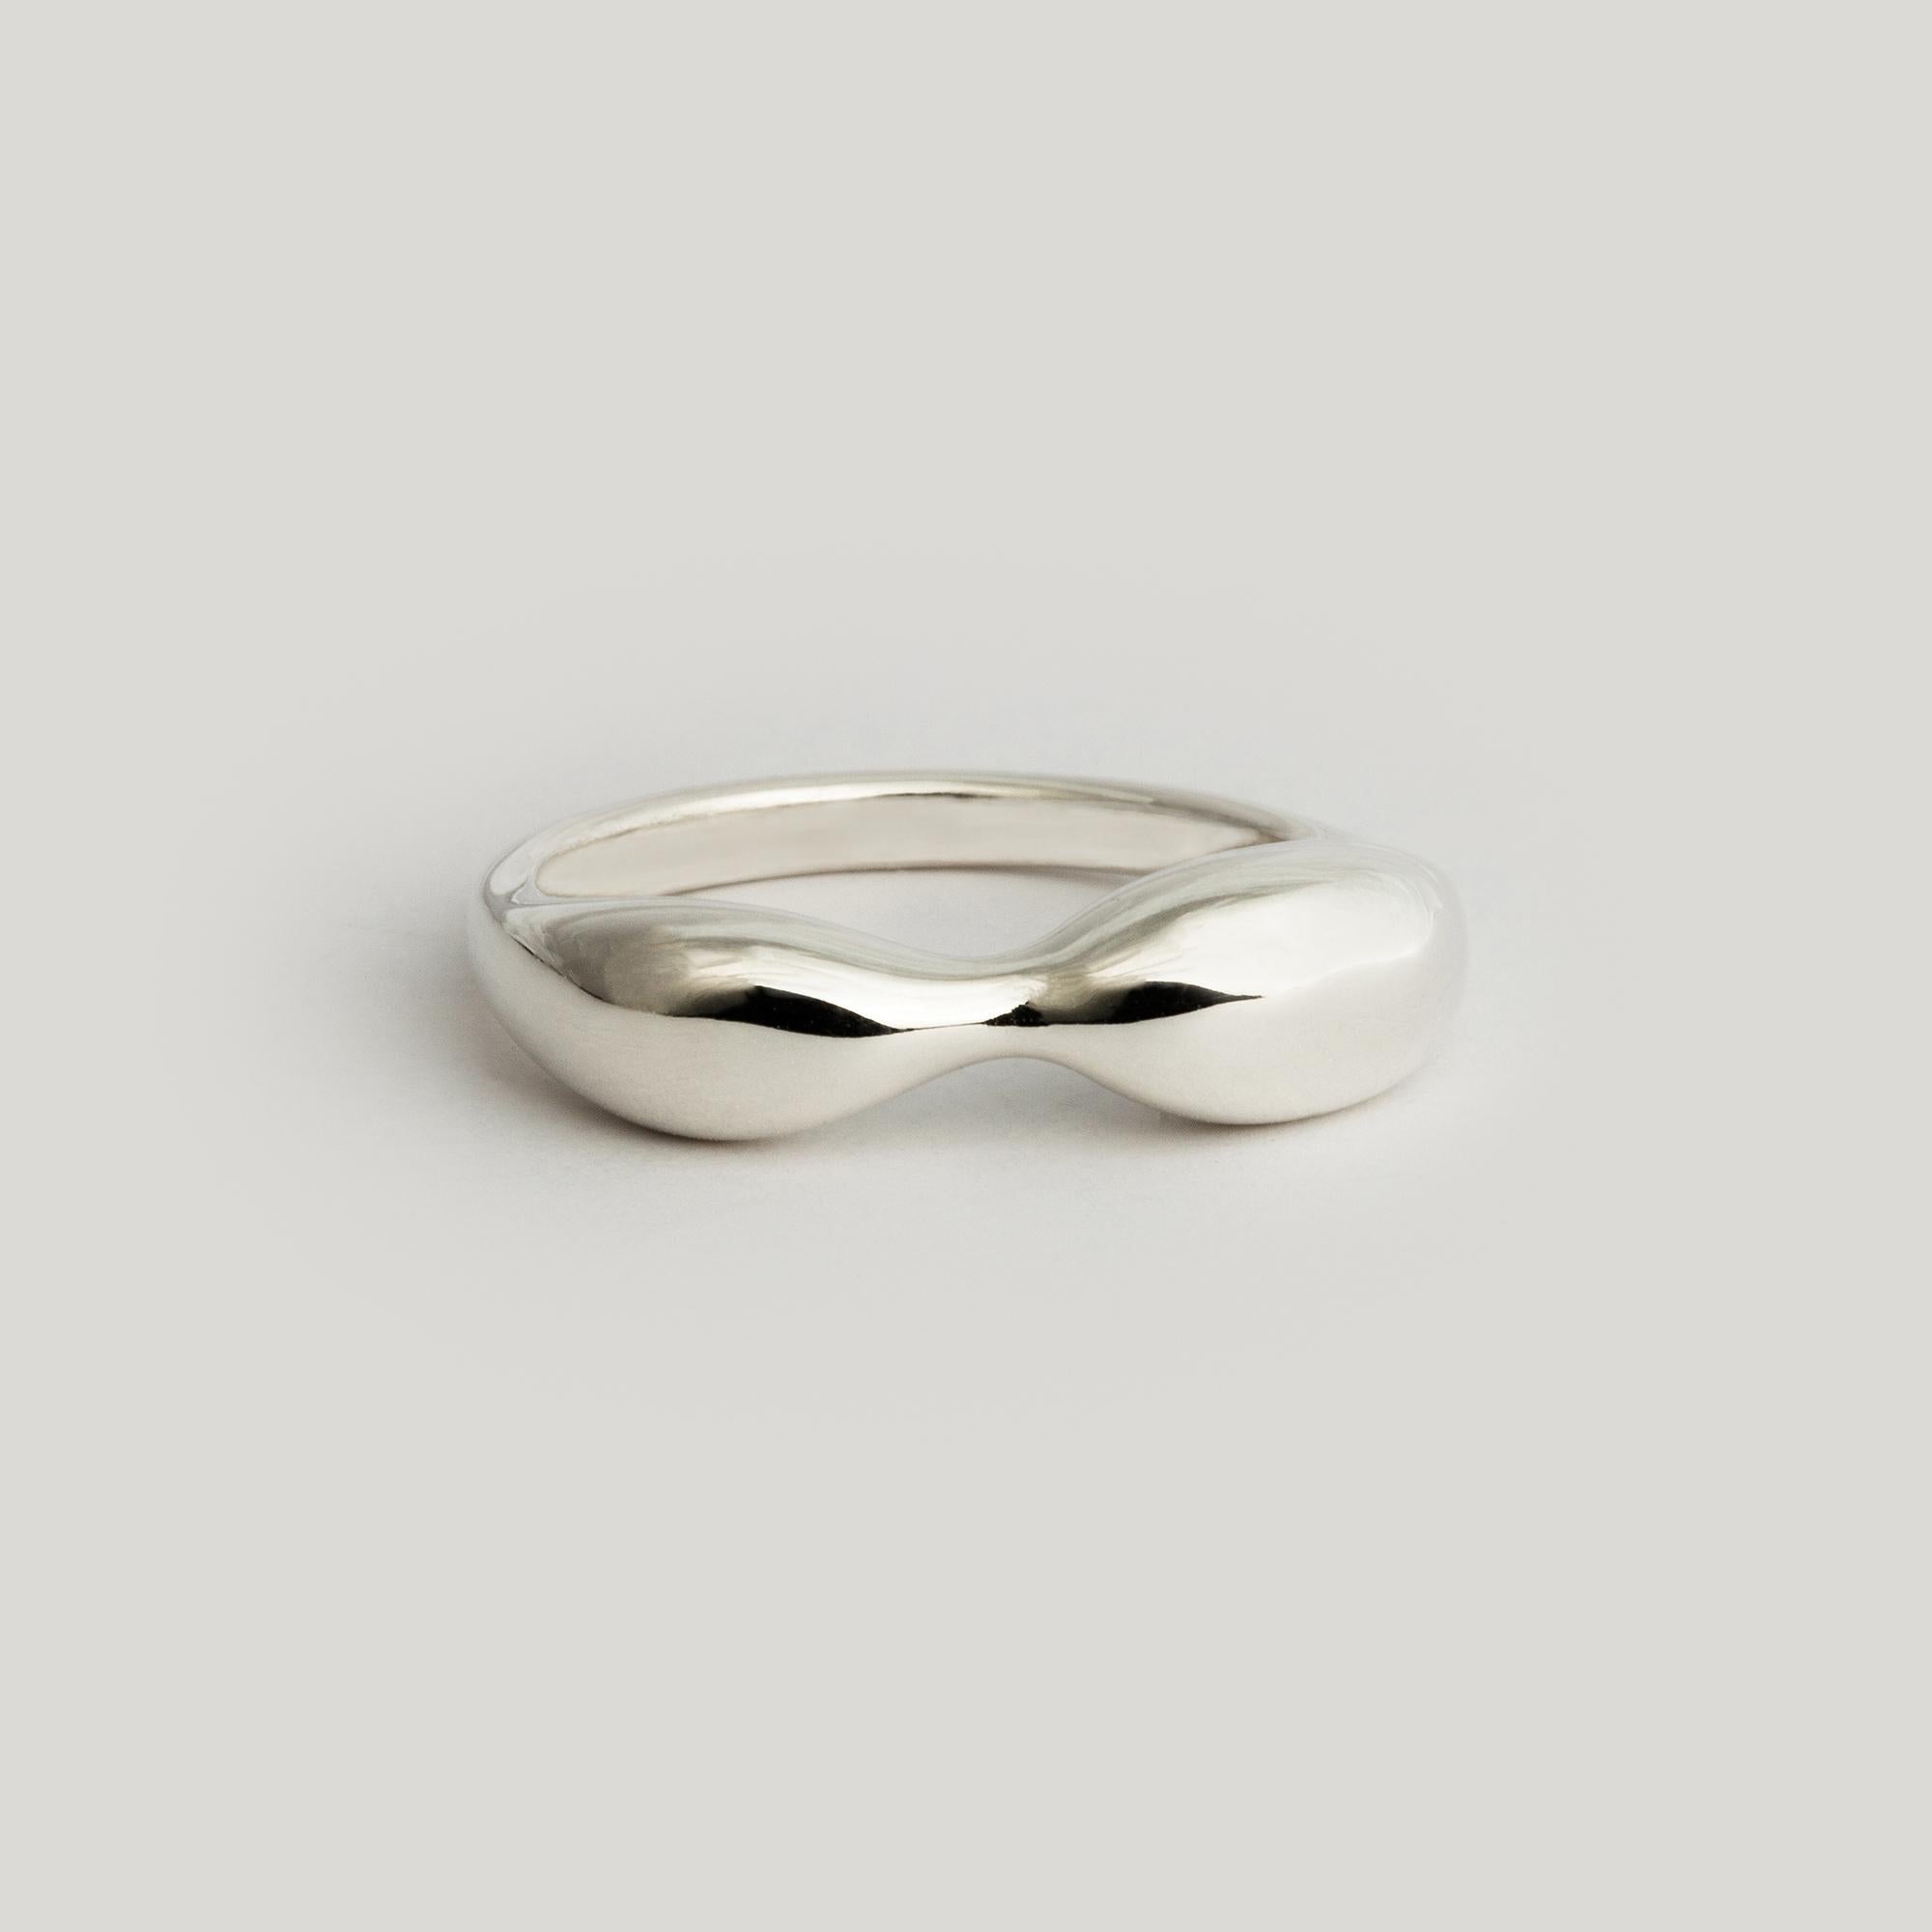 A humble dedication to the divine womanly figure. A gift to all my women. I designed this ring so that you see two profiles of a woman - a shapely body and a woman reclining. Send me a note if you see others!

MATERIAL
◘  Top form measures 7mm by